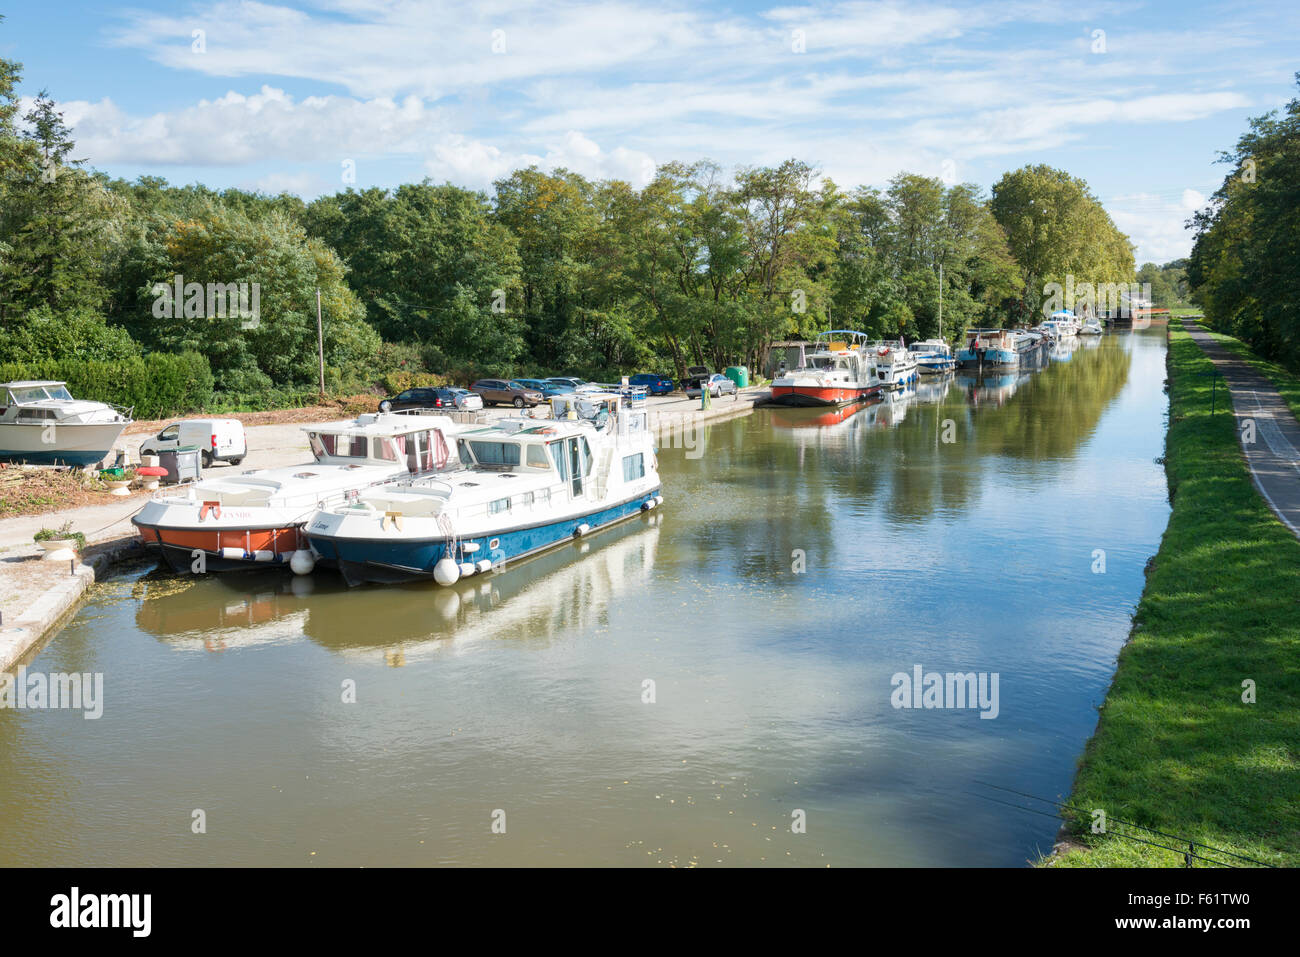 Boats moored on Le canal du centre, or central canal at Chagny France Stock Photo